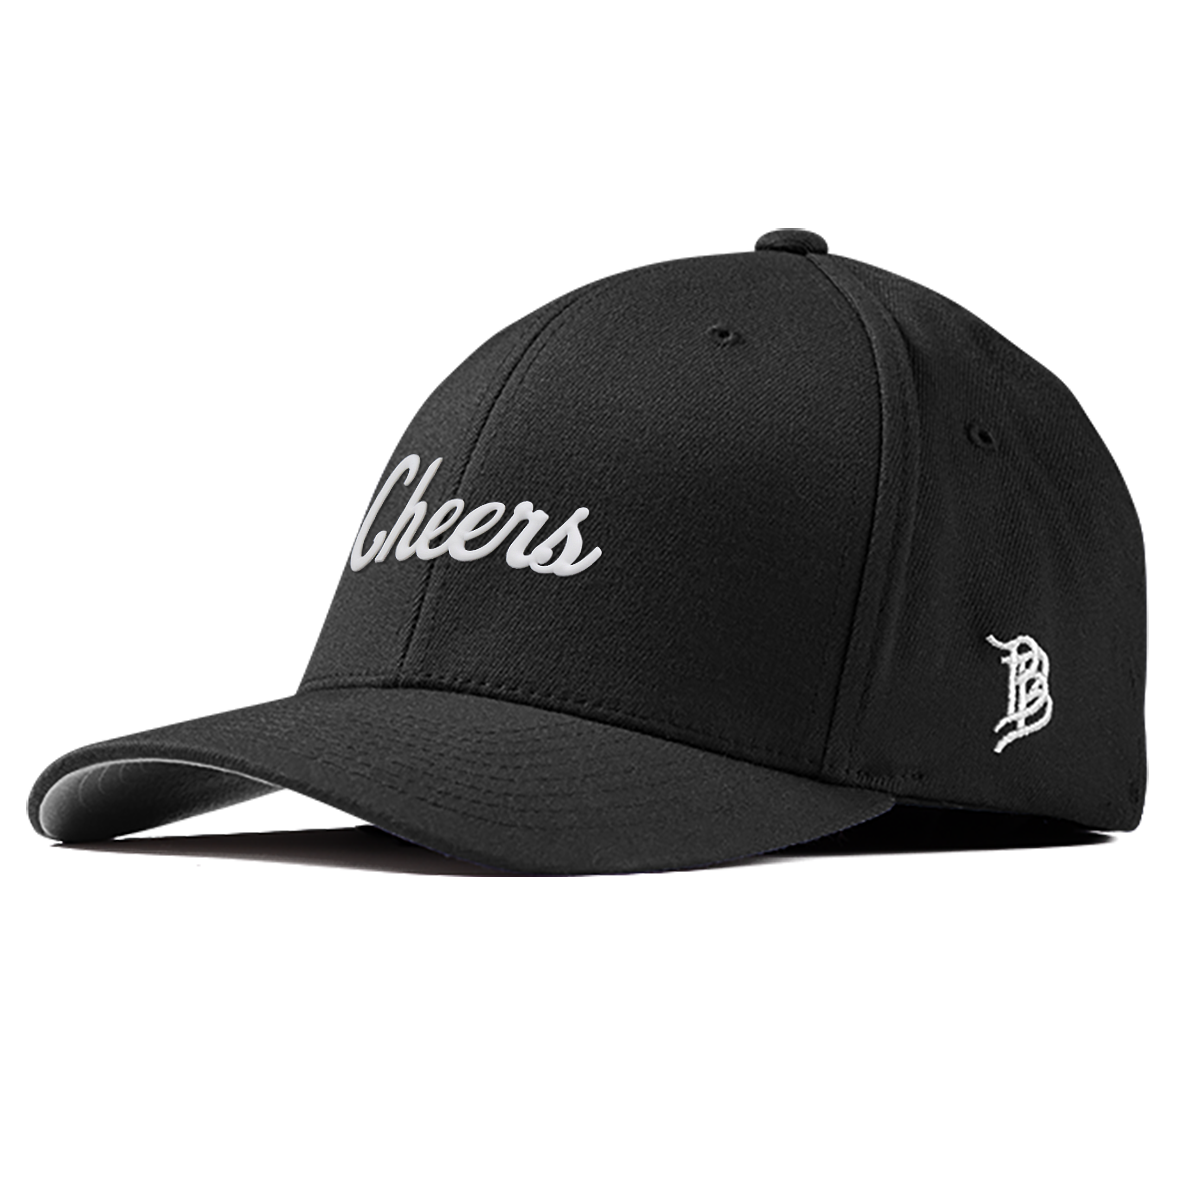 BB Cheers Fitted